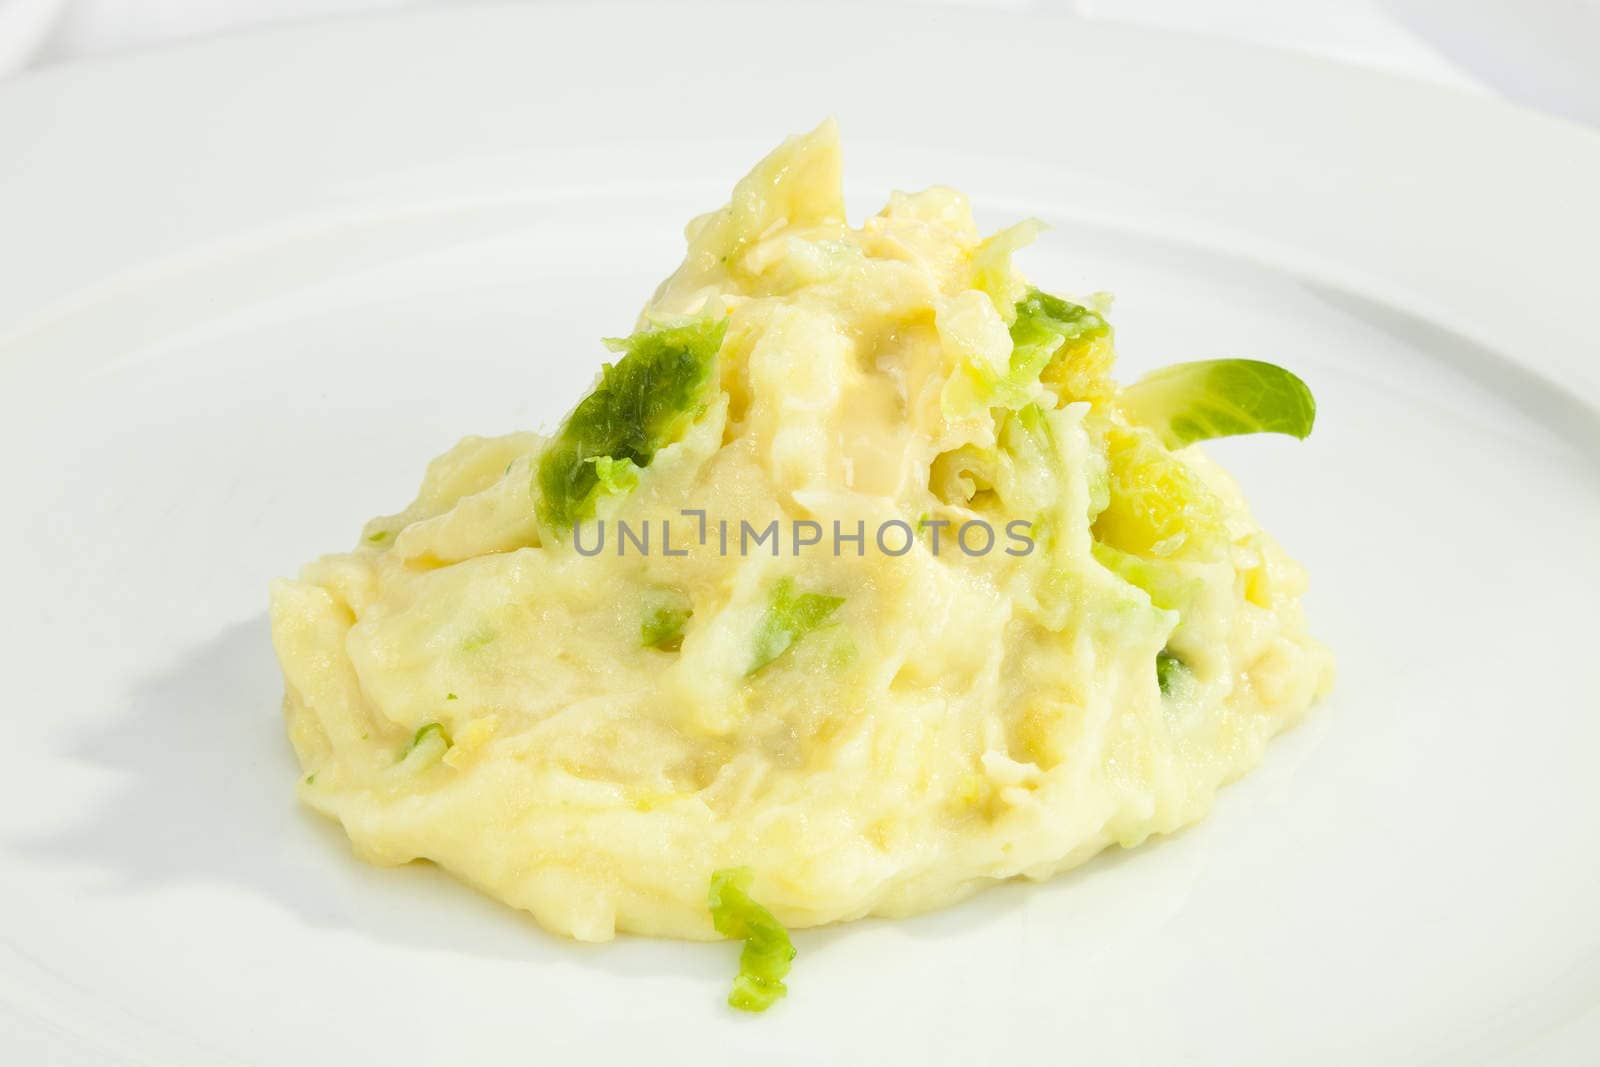 Mashed potatoes with cabbage by hanusst